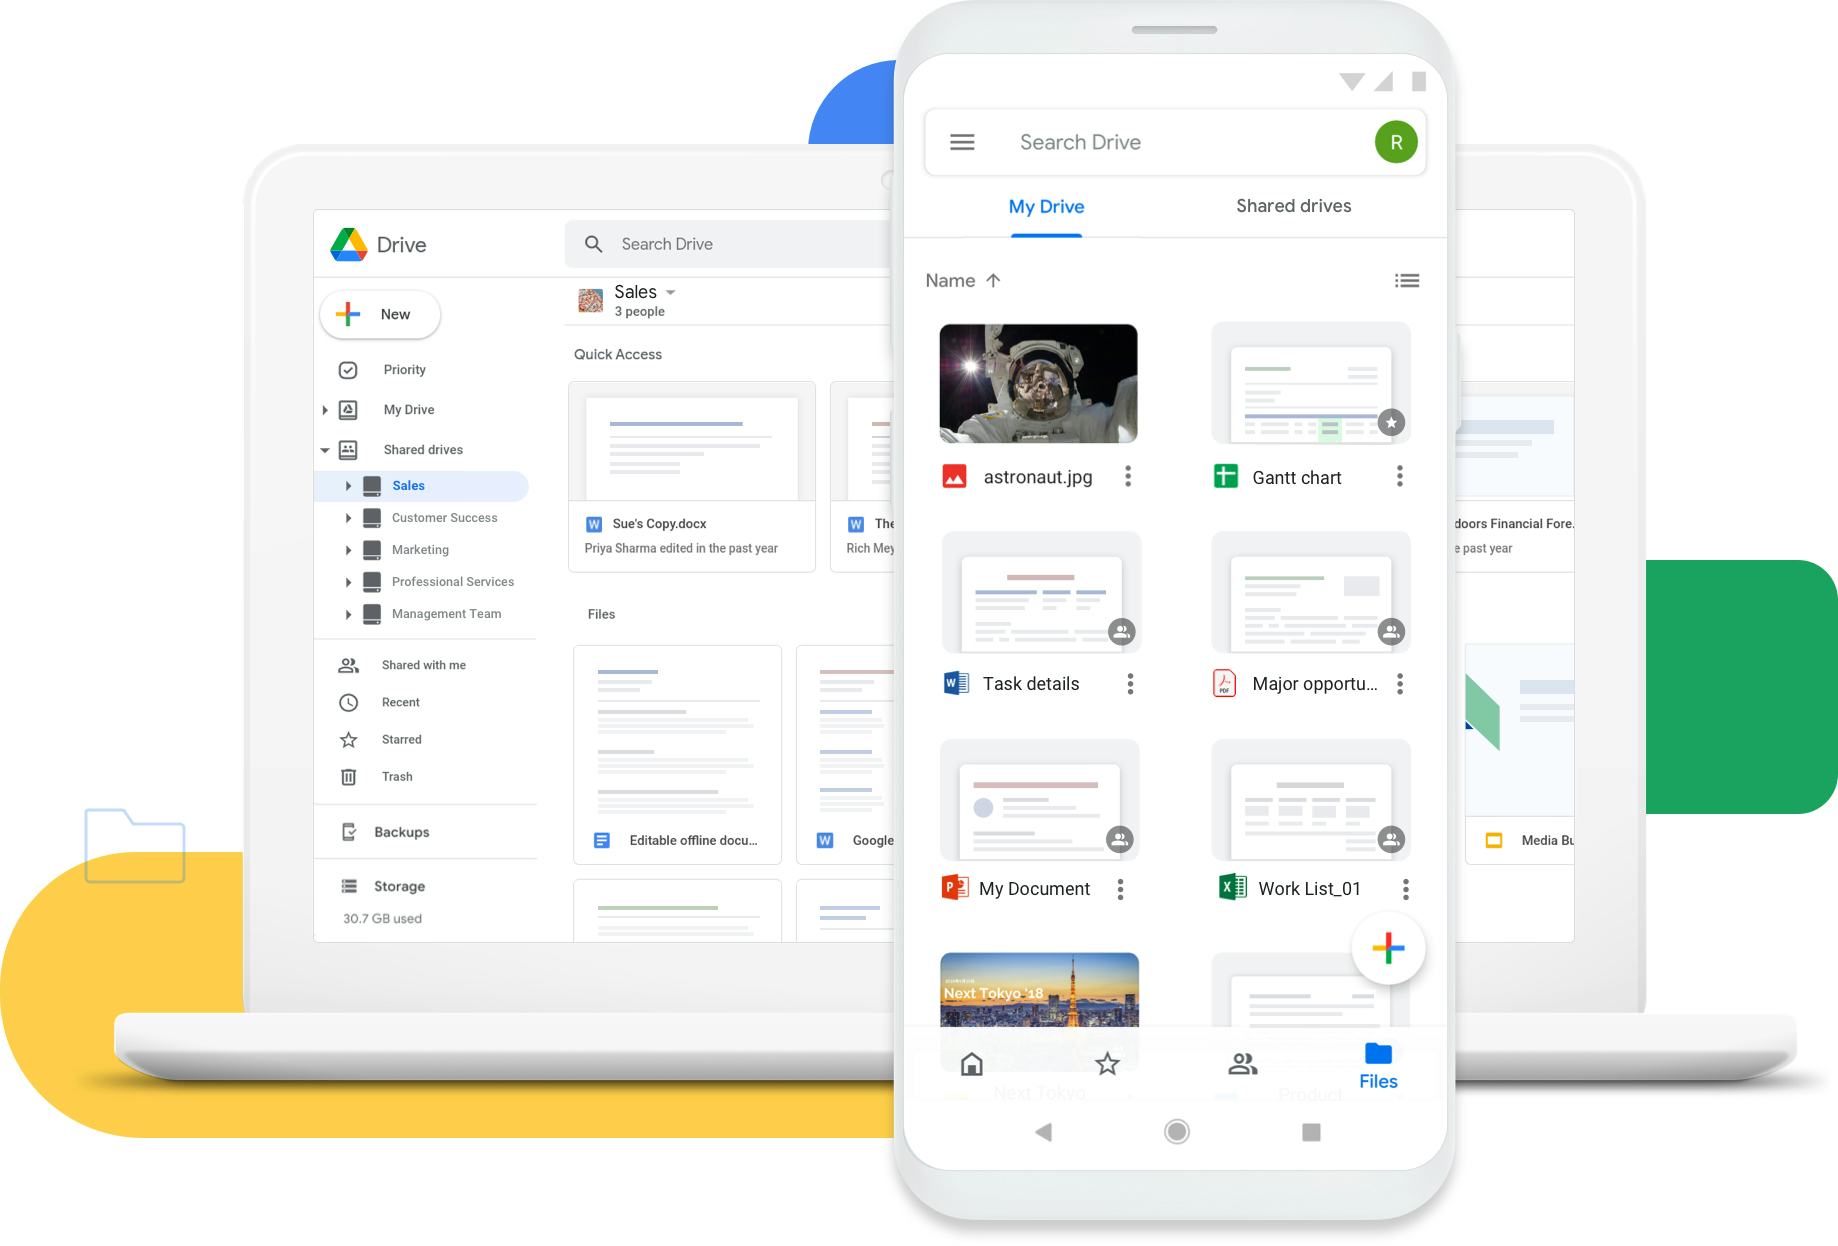 Google Drive Software - Easy and secure access to your content